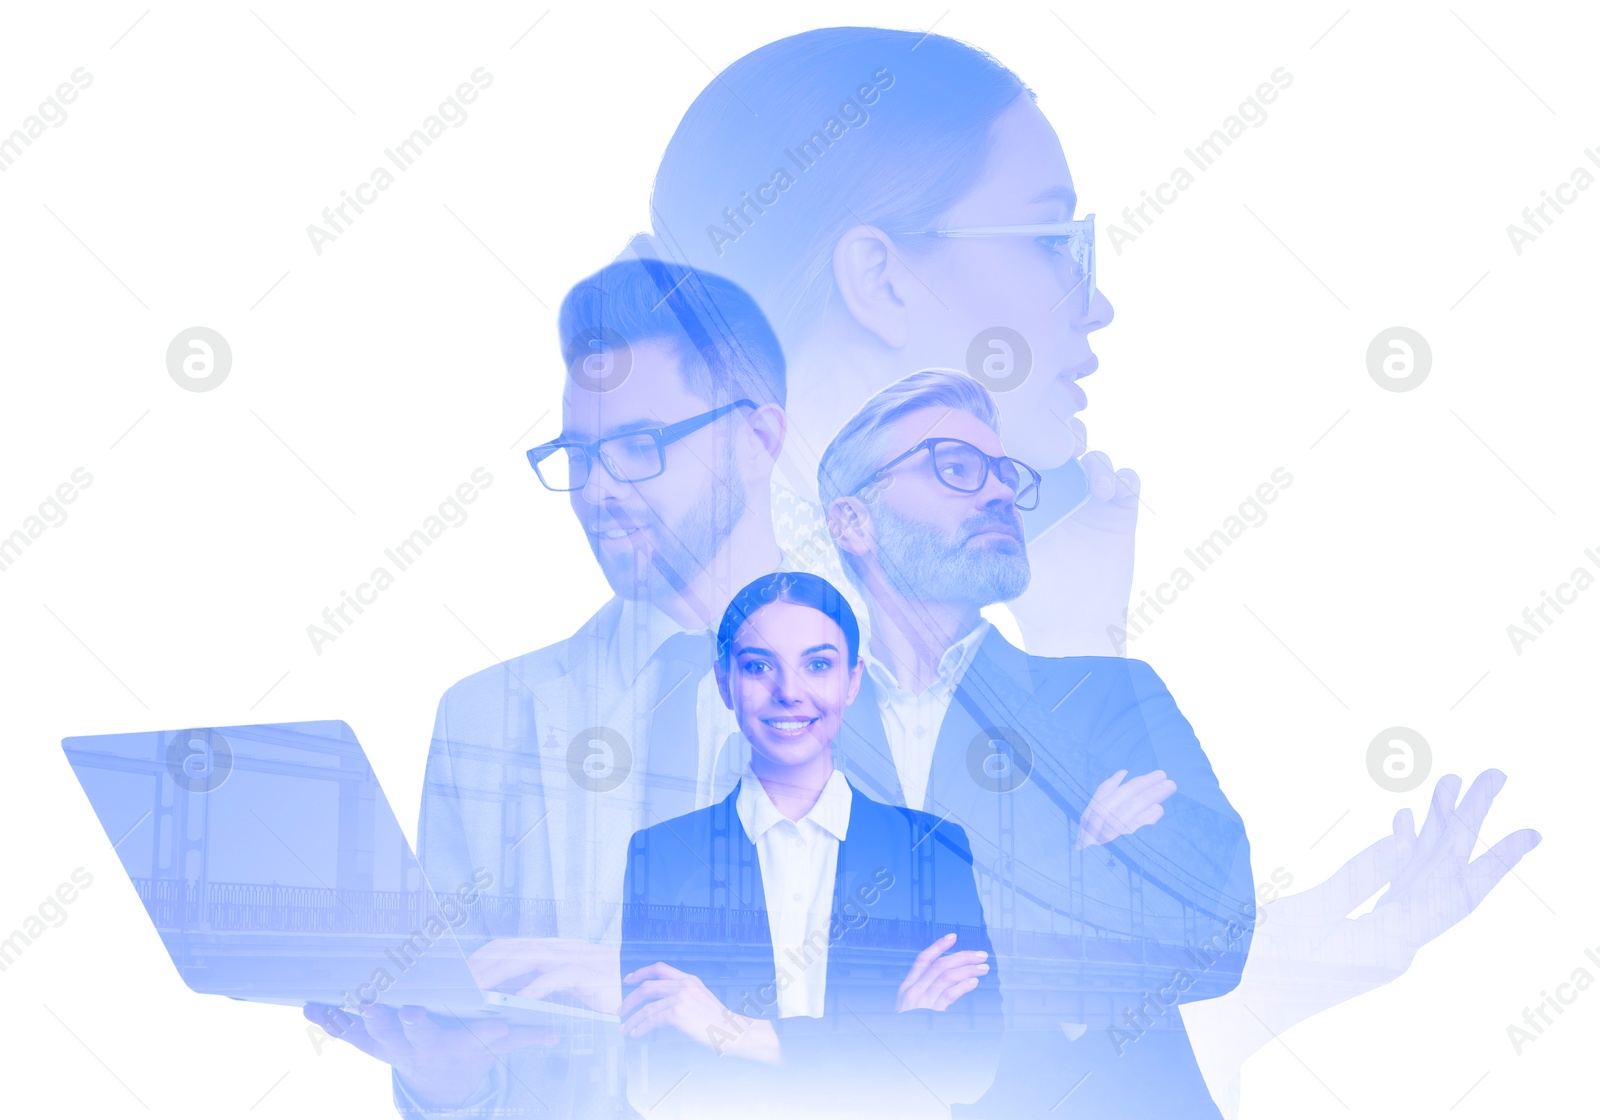 Image of Double exposure of different businesspeople and cityscape with bridge